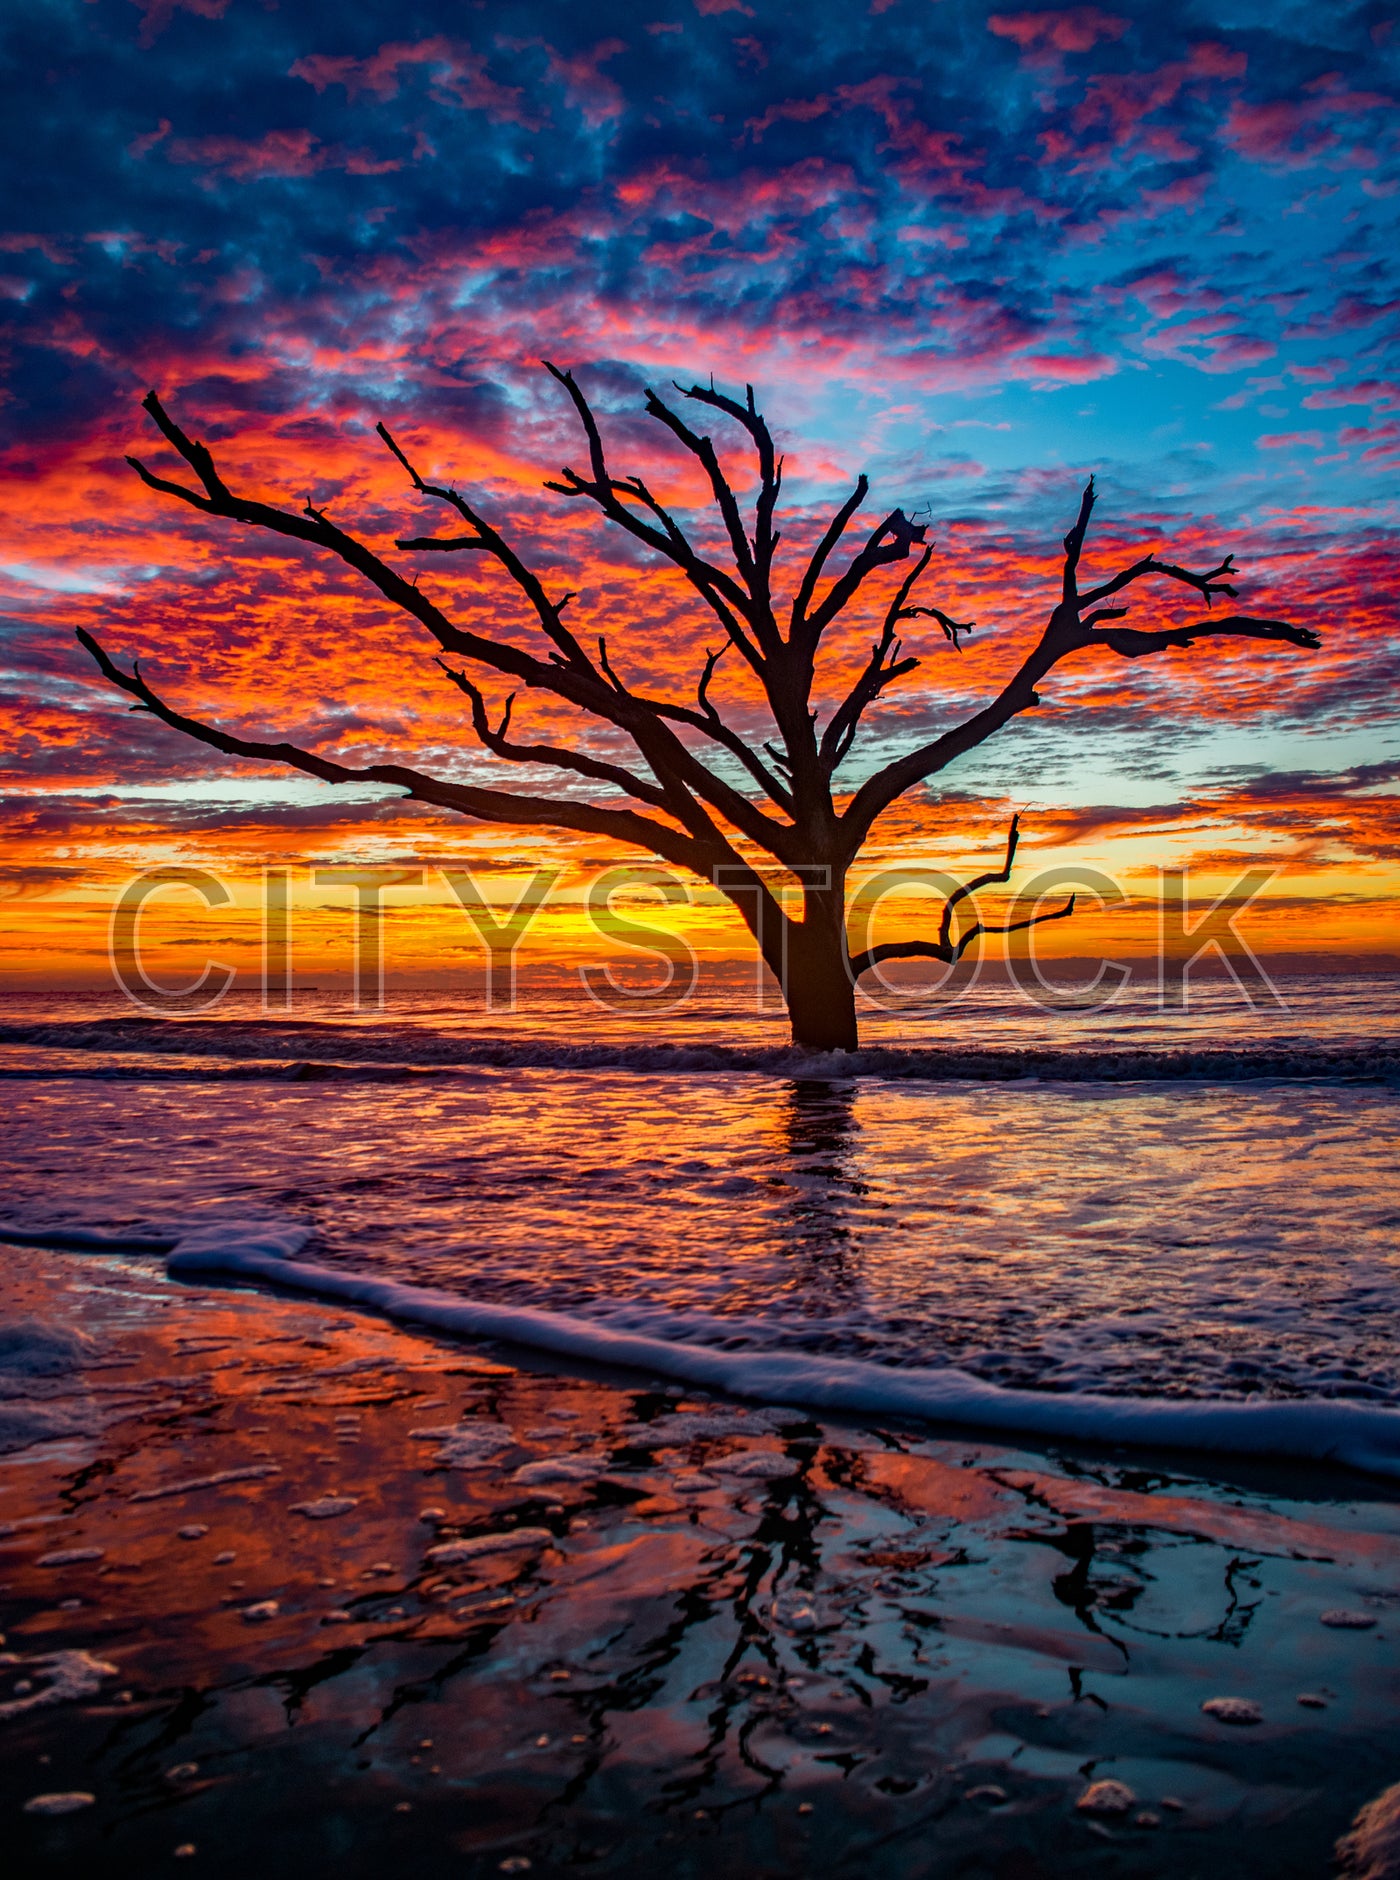 Silhouette of a tree against a colorful sunset sky in Edisto Island